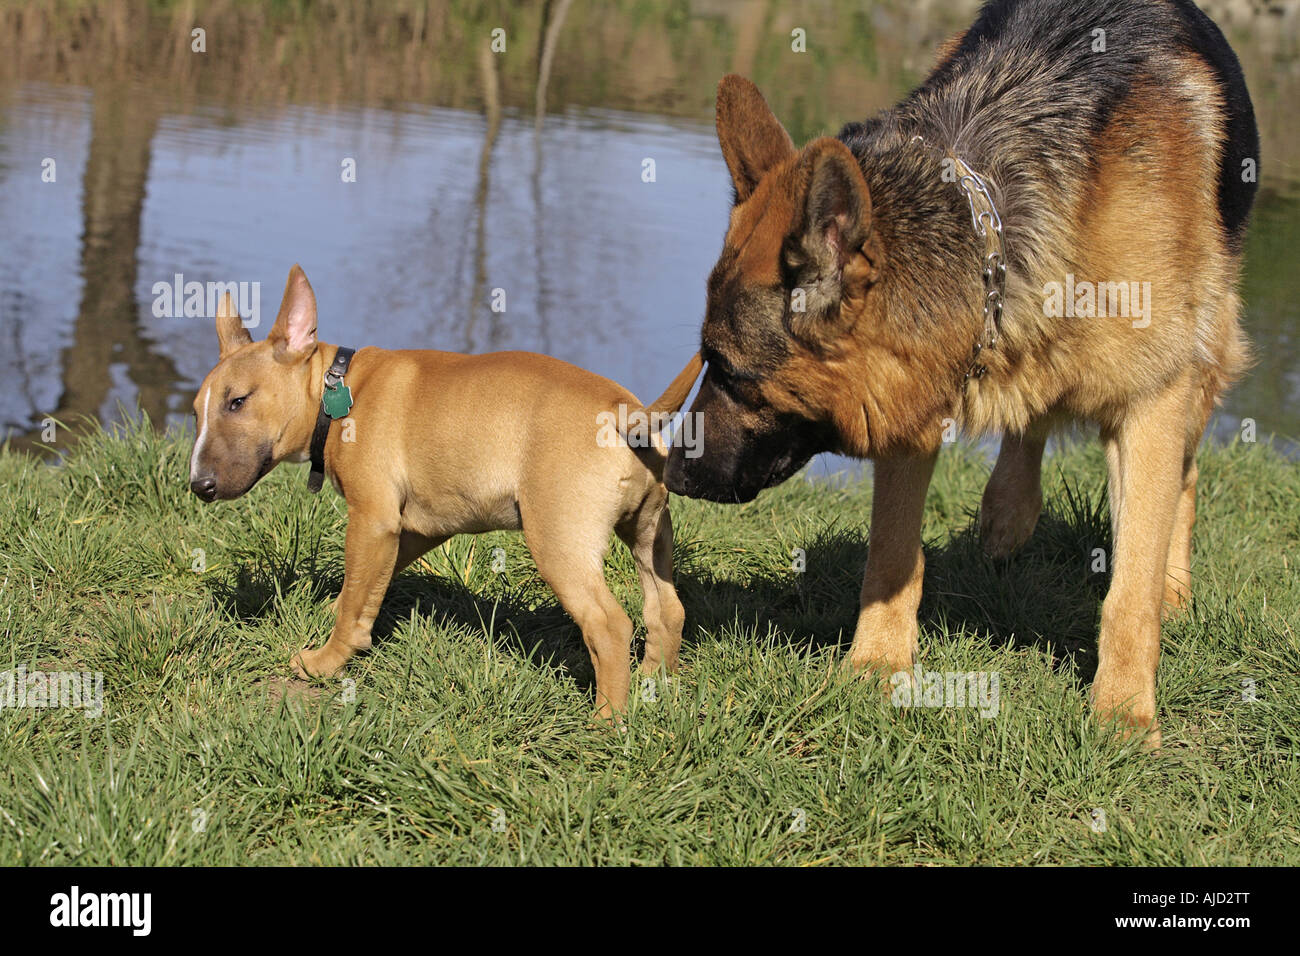 German Shepherd Dog (Canis lupus f. familiaris), sniffing at rear side of a Bull Terrier Stock Photo